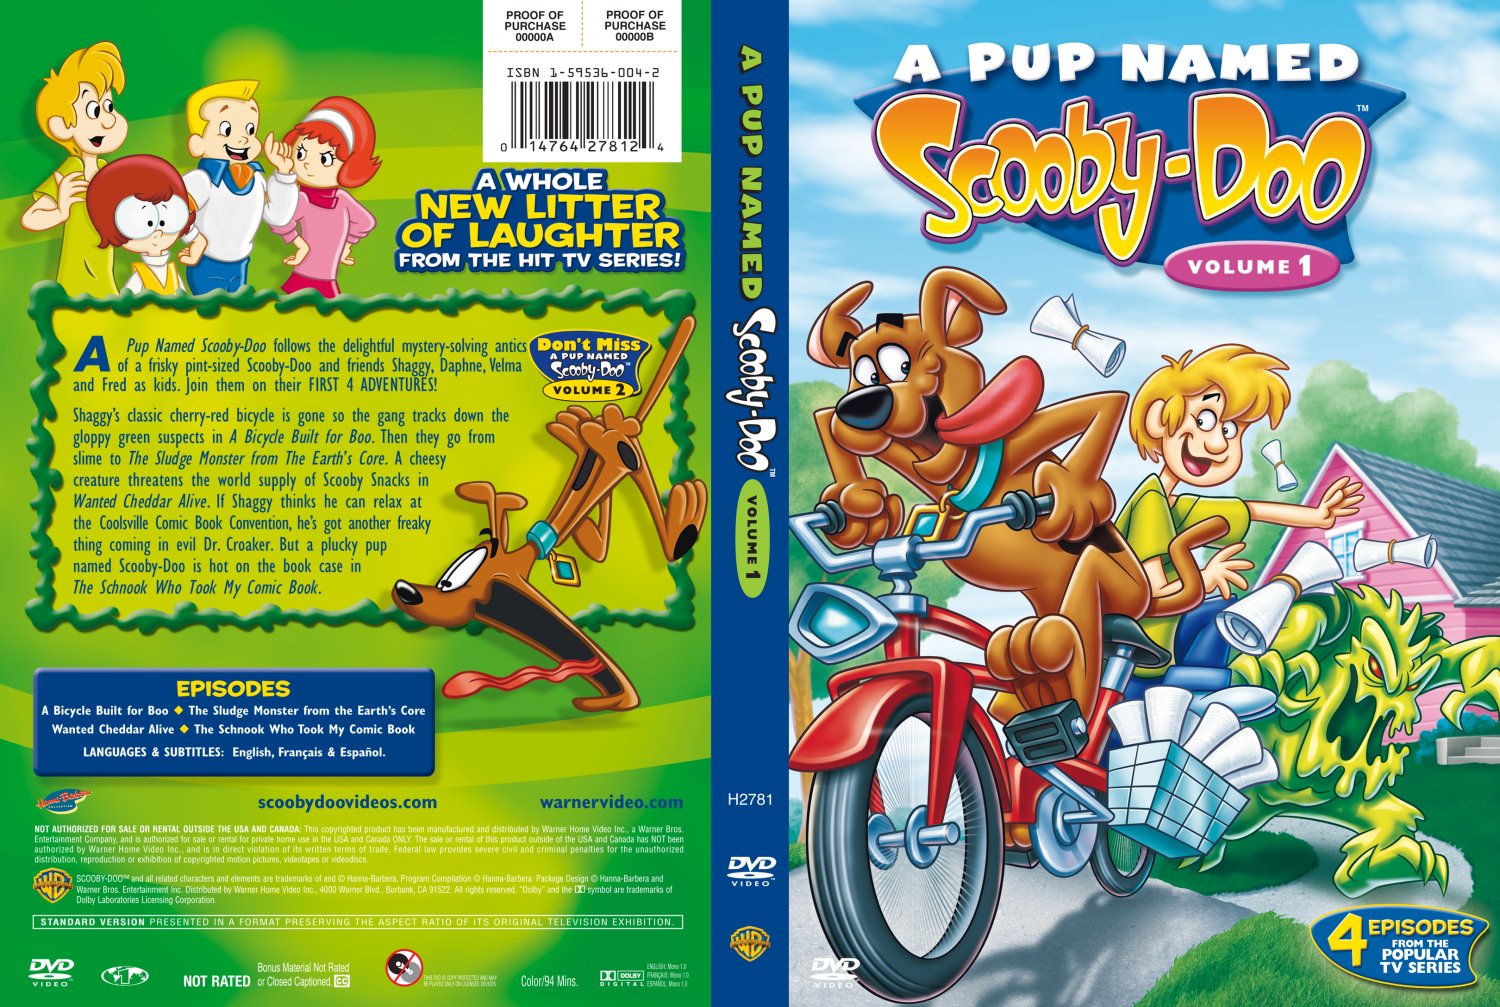 A Pup Named Scooby-Doo Vol 1 - TV DVD Scanned Covers - A Pup Named ...